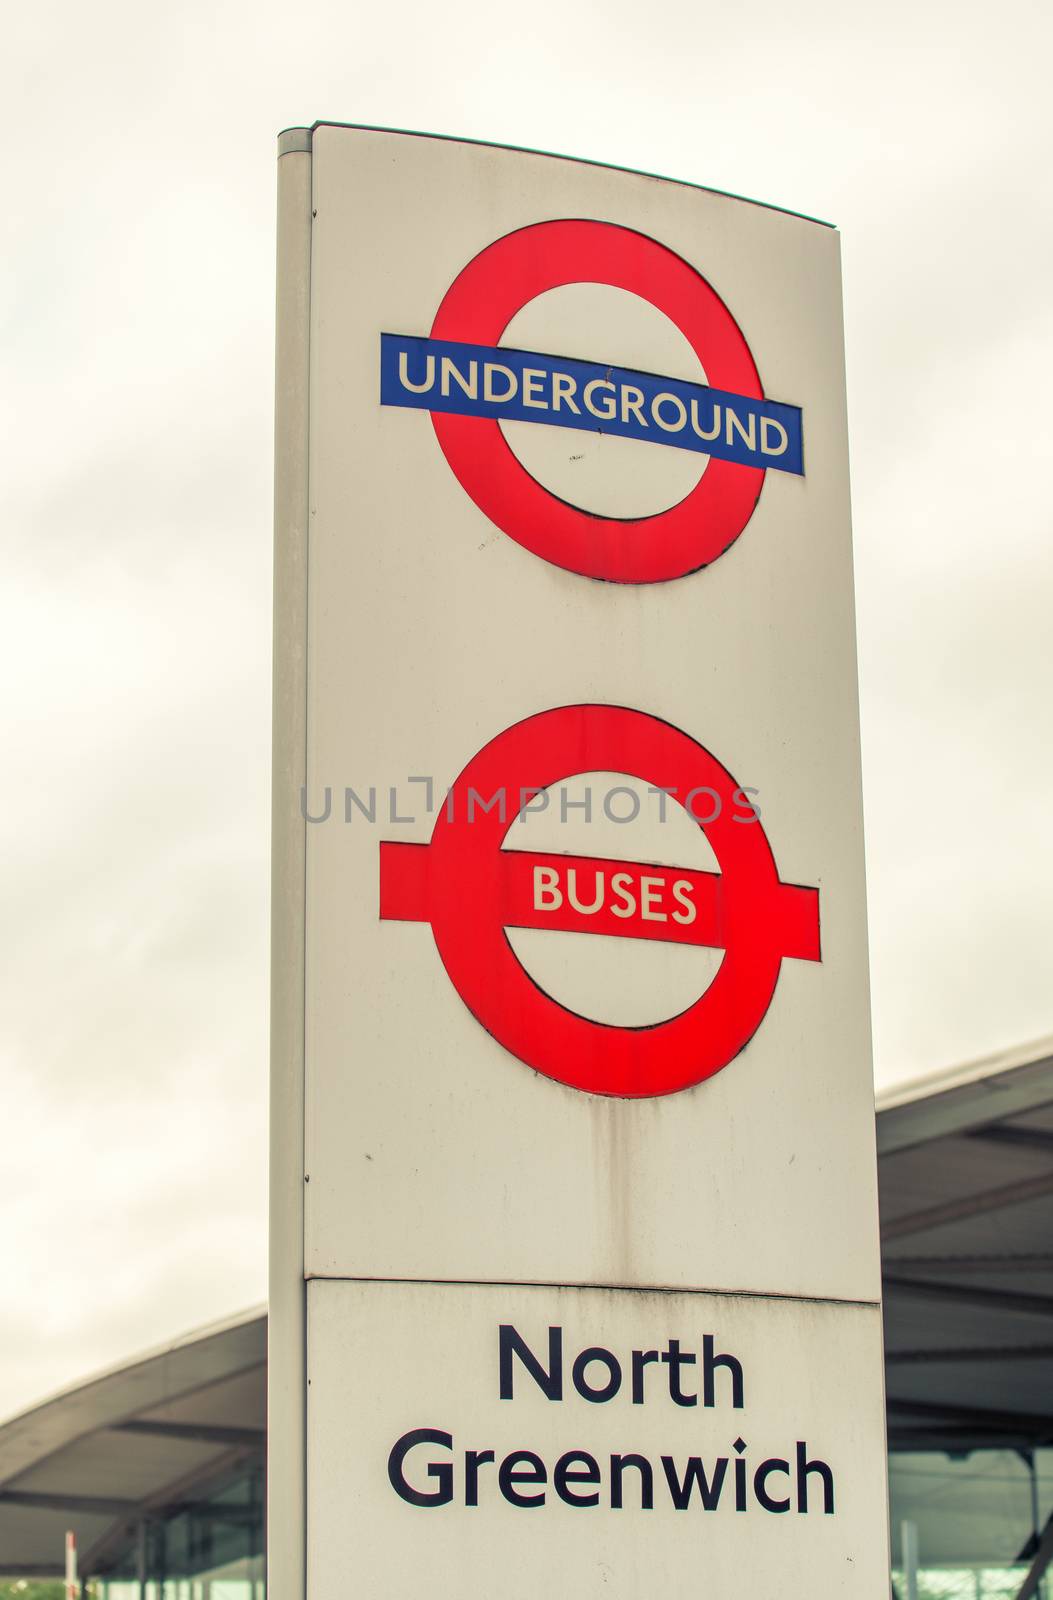 LONDON - SEPTEMBER 29, 2013: Underground and buses sign. London's underground railway is the oldest in the world, dating back to 1863